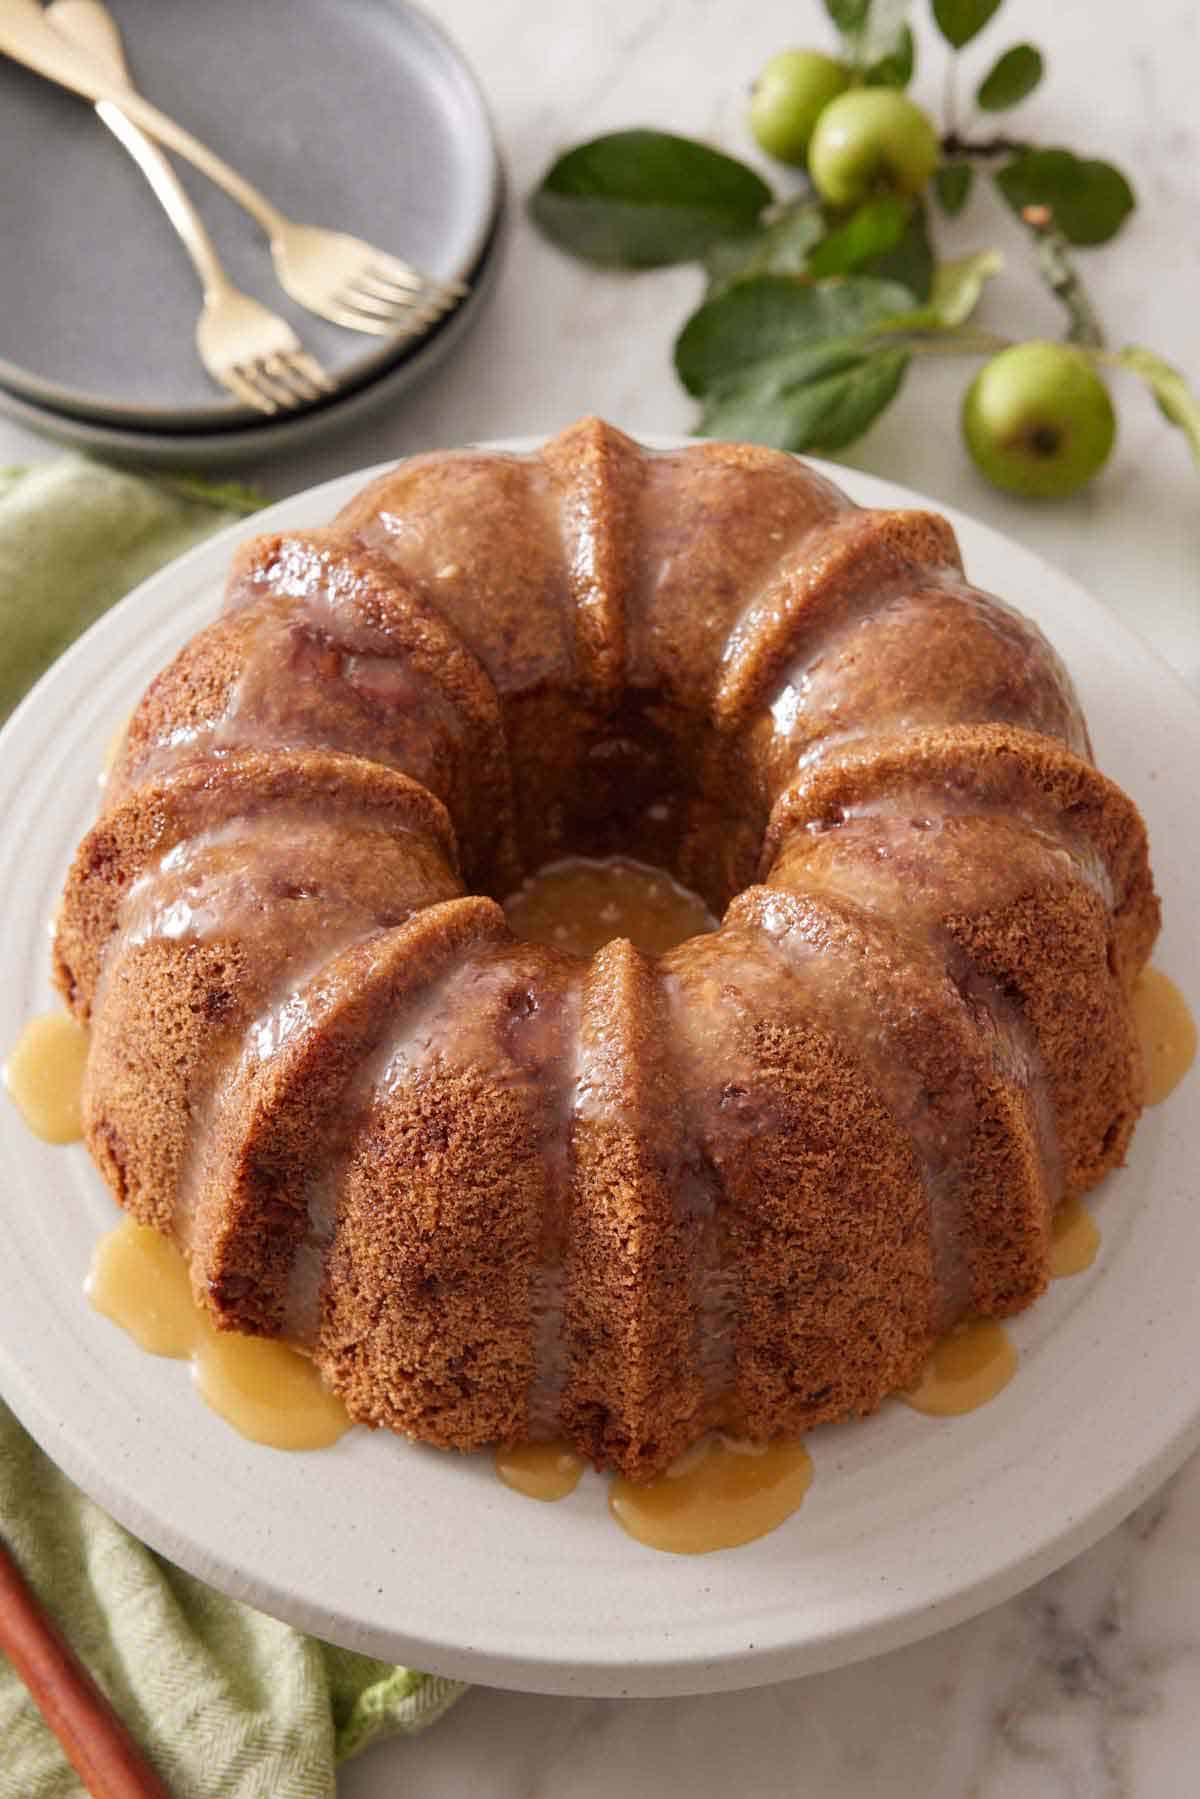 An apple bundt cake on a cake stand with a glaze drizzled over it. Apples, plates, and forks in the background.